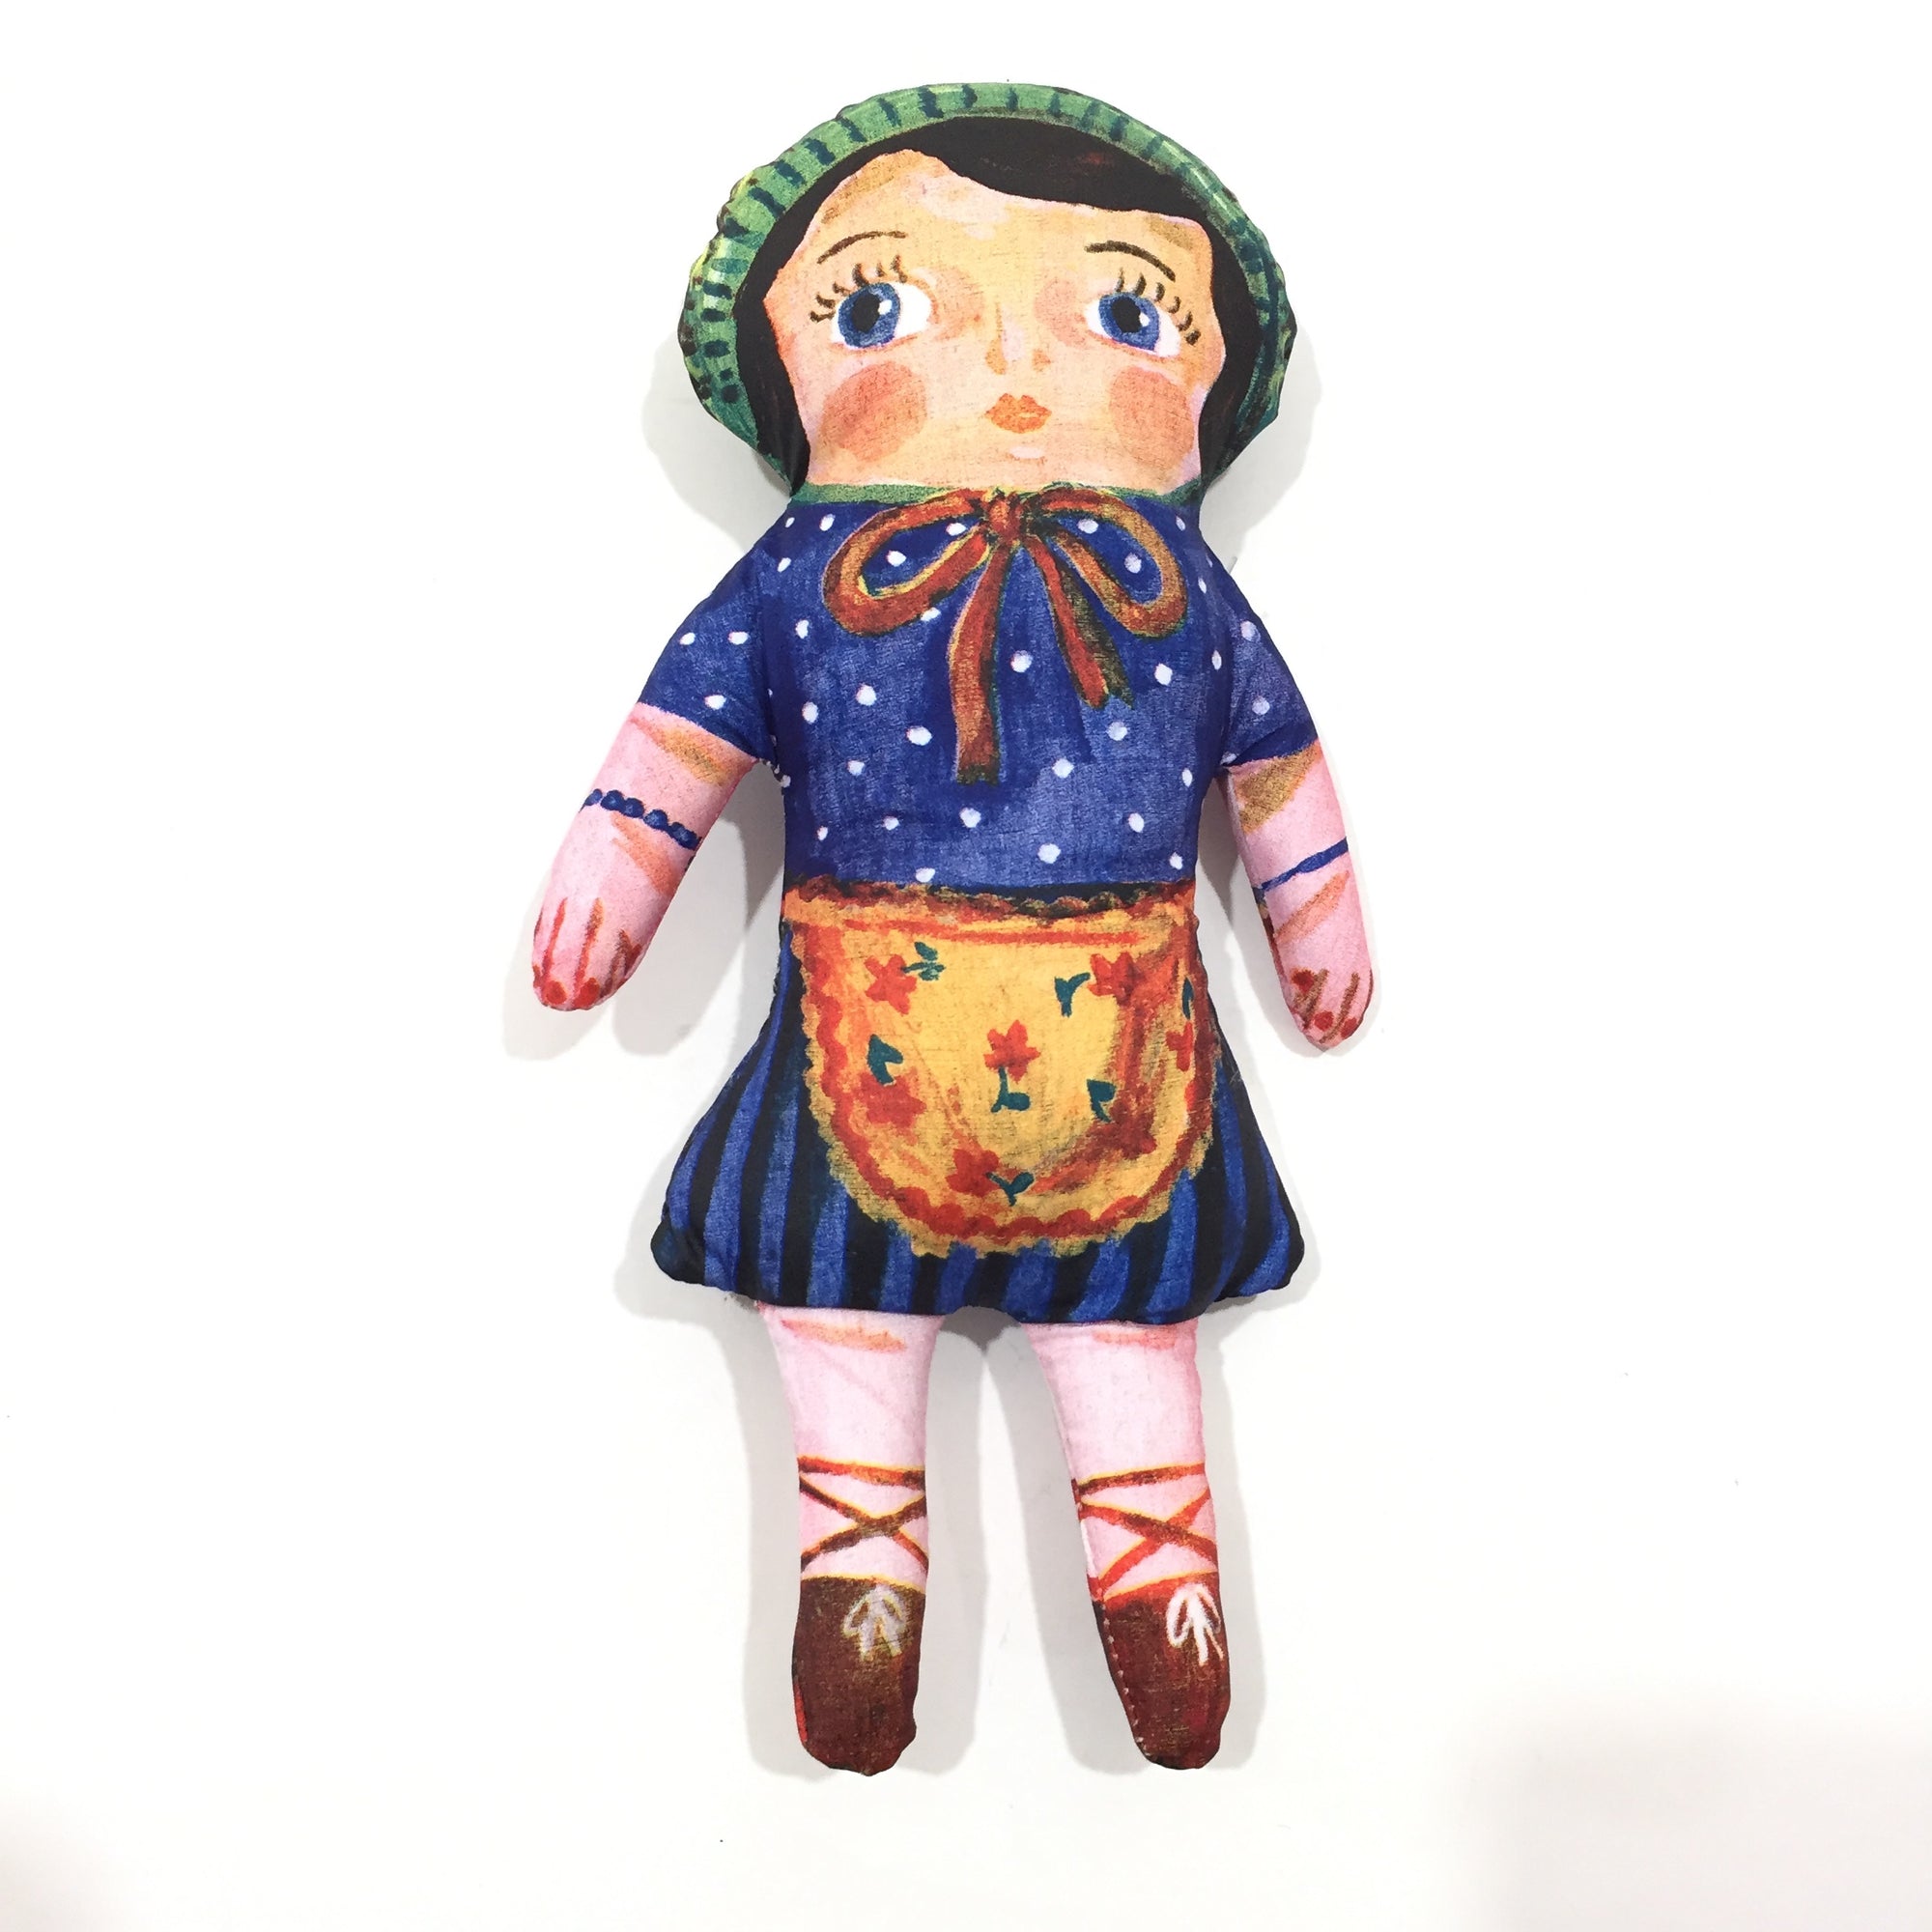 Dolly Doll by Nathalie Lete